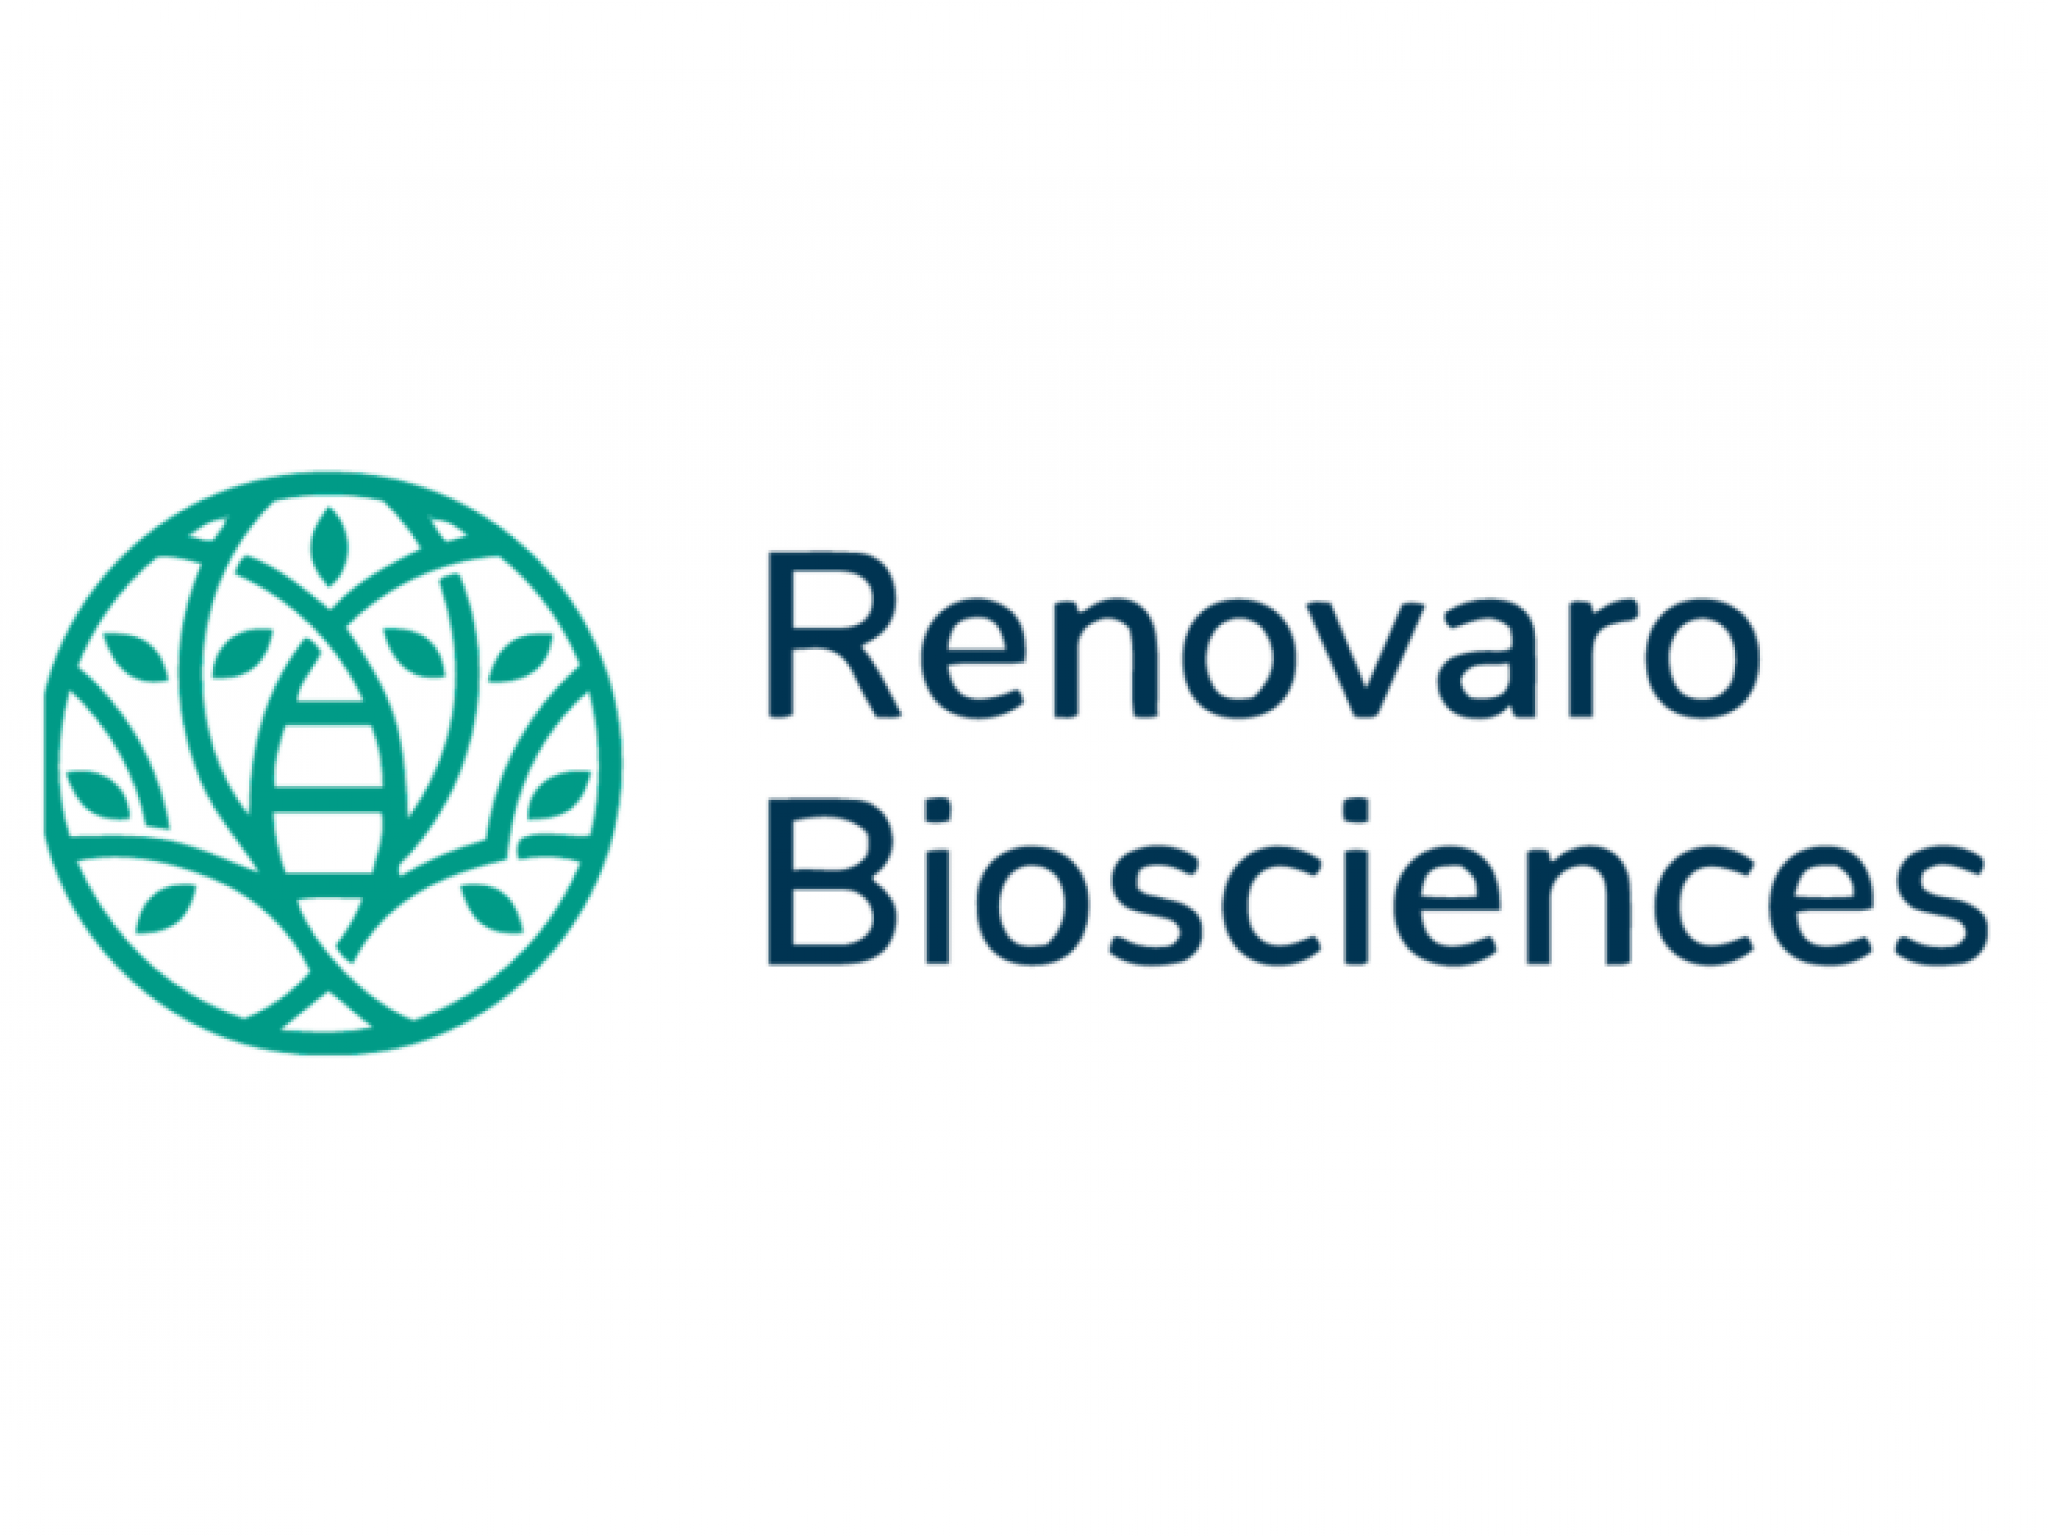  renovaro-biosciences-faces-turmoil-after-hindenburg-report-accusing-questionable-merger-and-governance-stock-crashes 